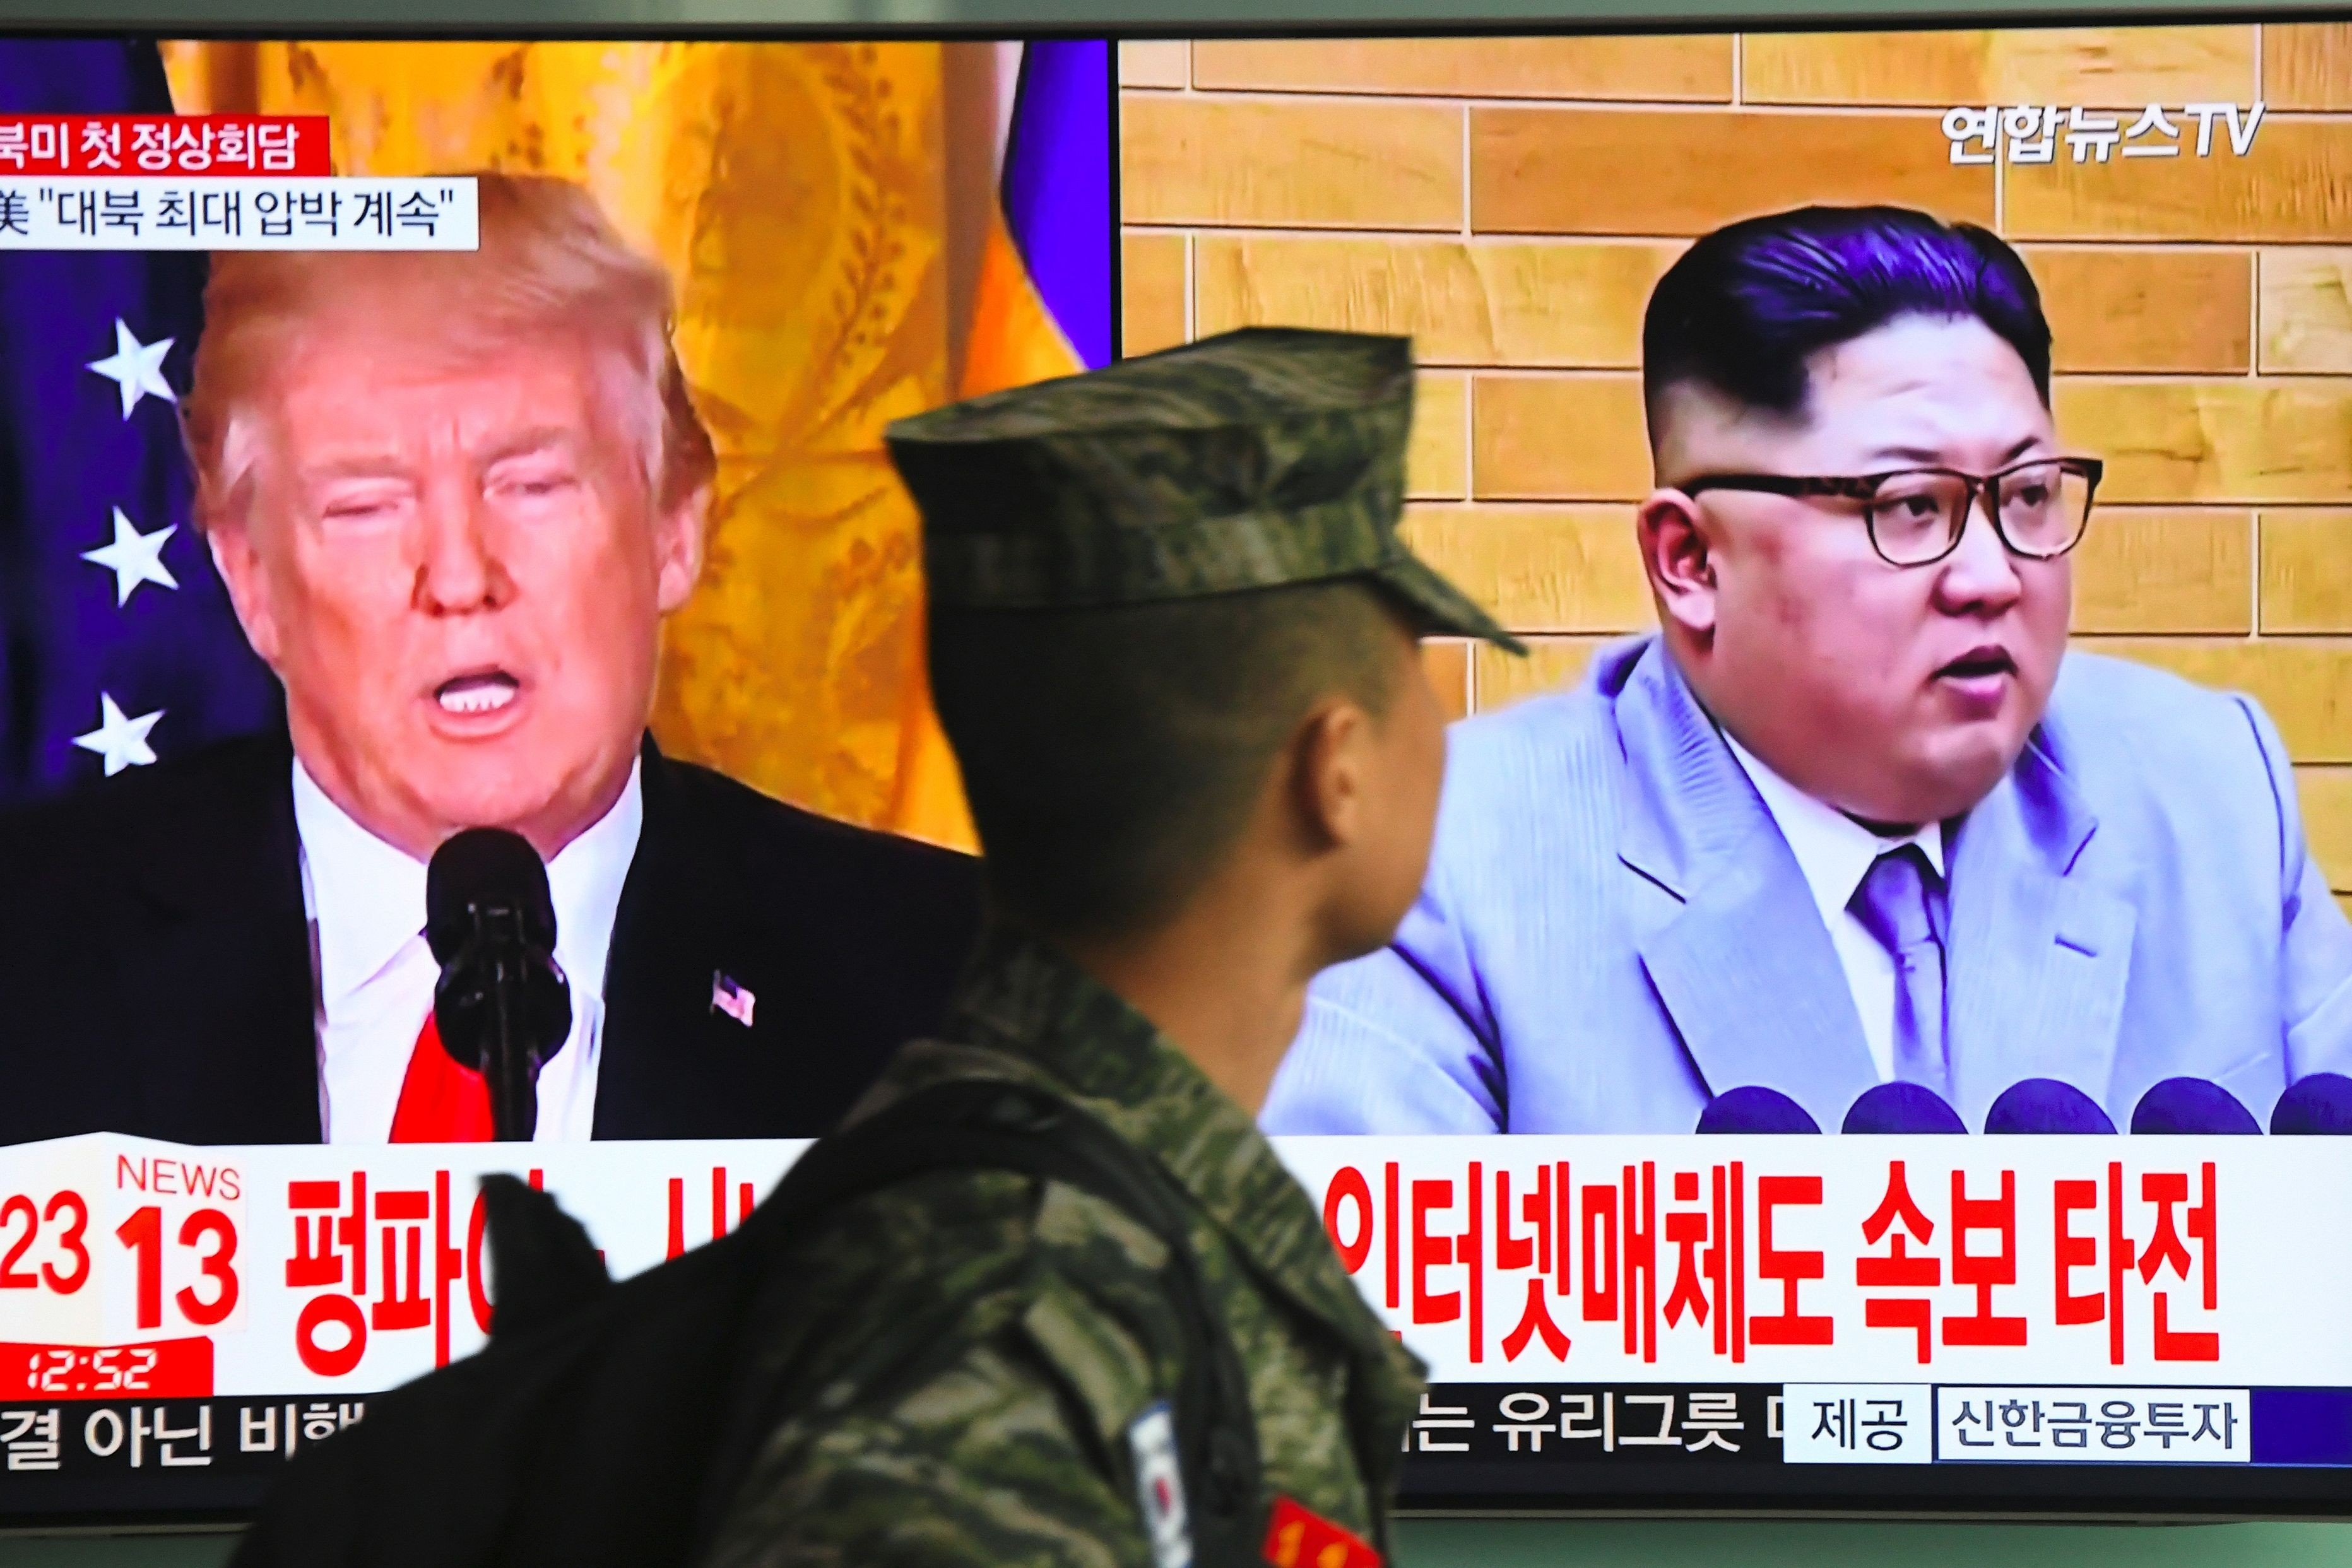 A South Korean soldier walks past a television screen showing pictures of US President Donald Trump and North Korean leader Kim Jong-un. The two heads of state are expected to meet in May. Photo: AFP